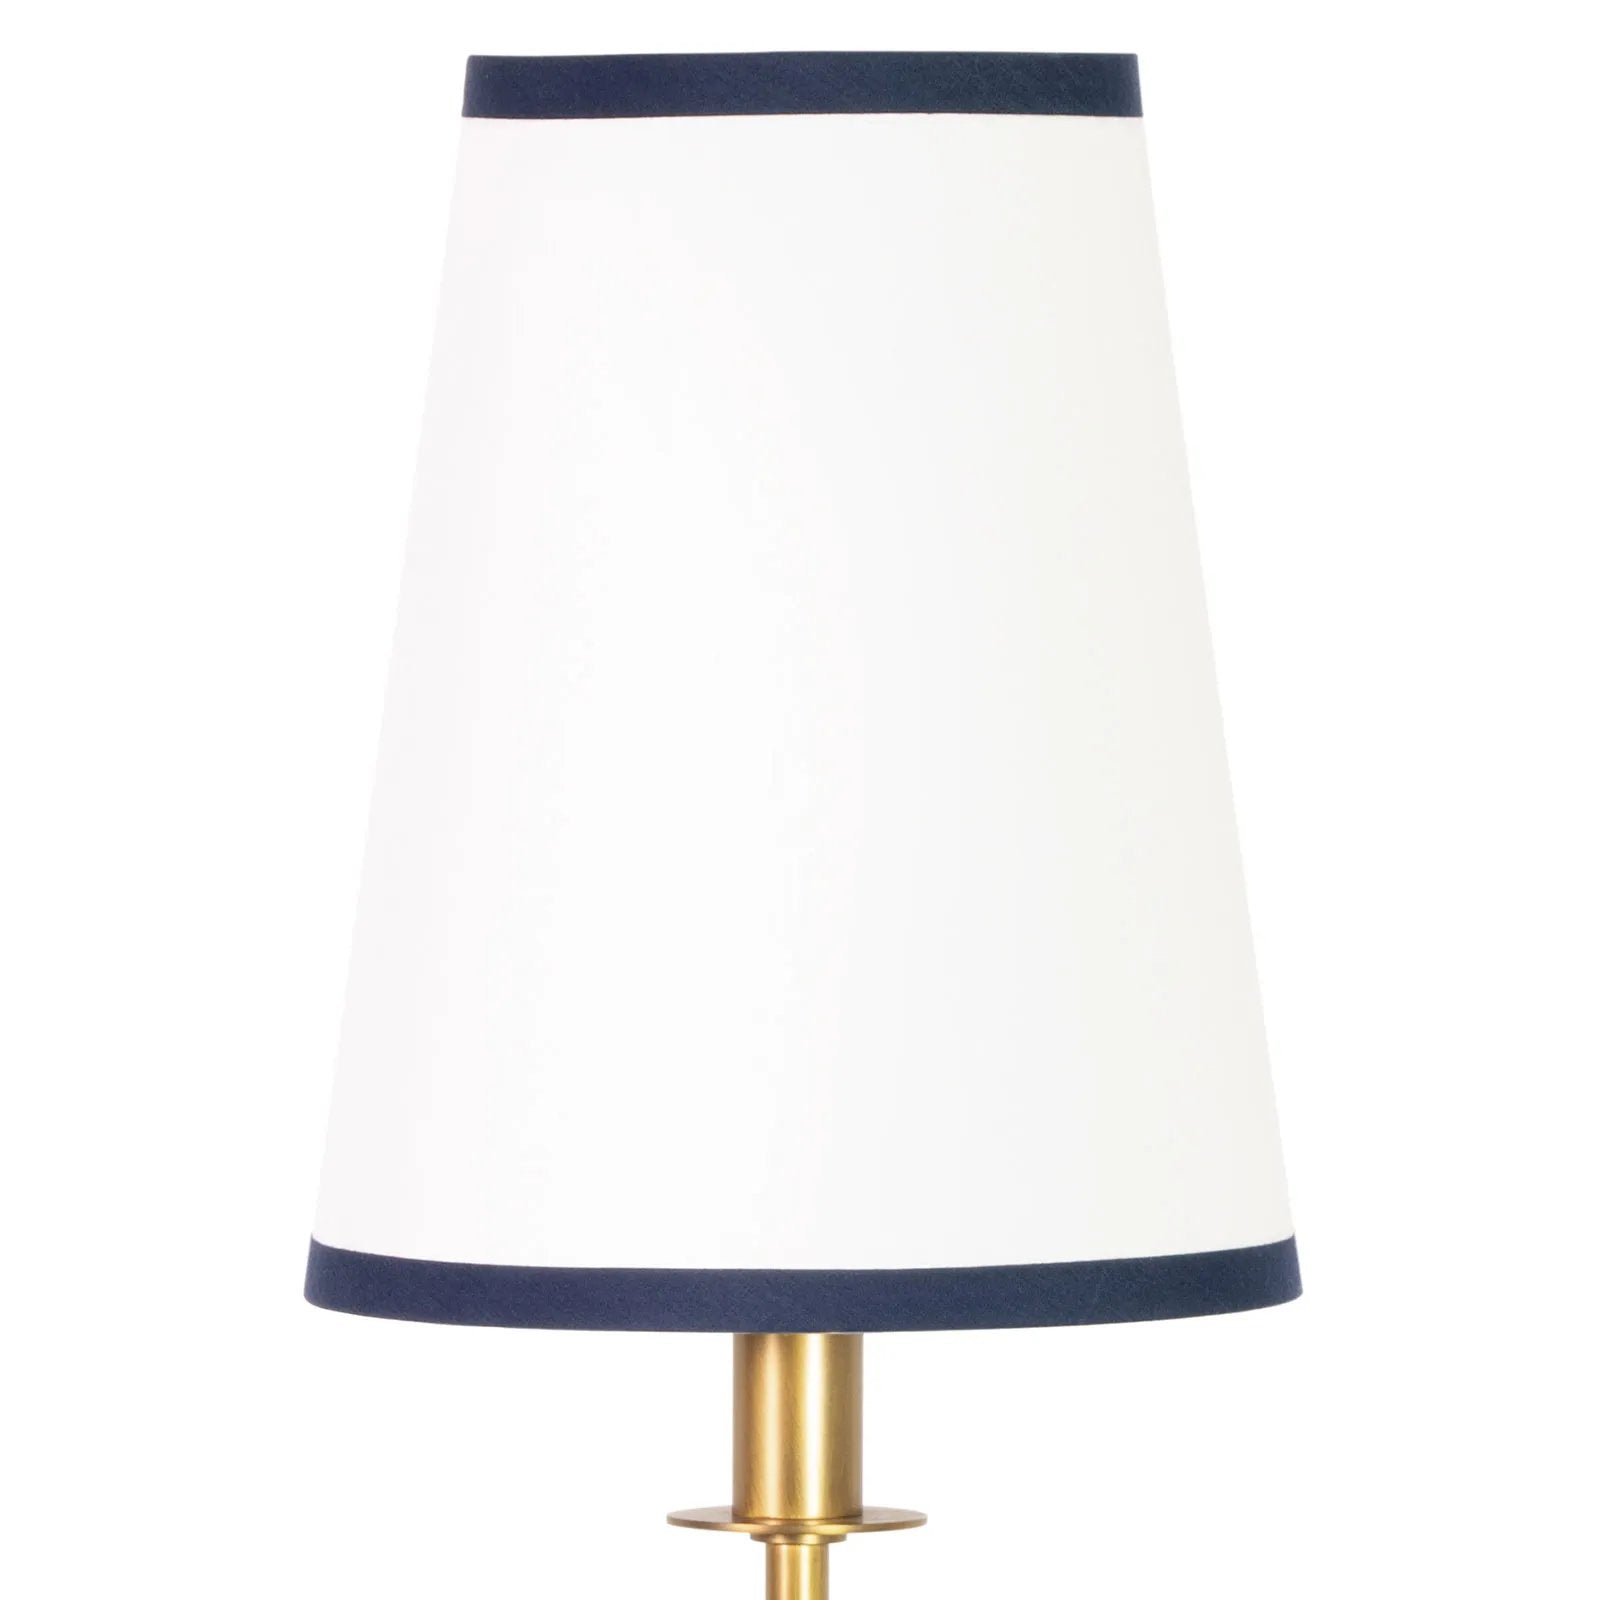 The Daisy Buffet Lamp is an updated classic with fine details such as its namesake daisy-shaped natural brass base and custom natural linen shade with navy trim. A part of our Southern Living Lighting Collection, the Daisy is an elegant addition to a dining room, living room or bedroom. Amethyst Home provides interior design, new home construction design consulting, vintage area rugs, and lighting in the Calabasas metro area.